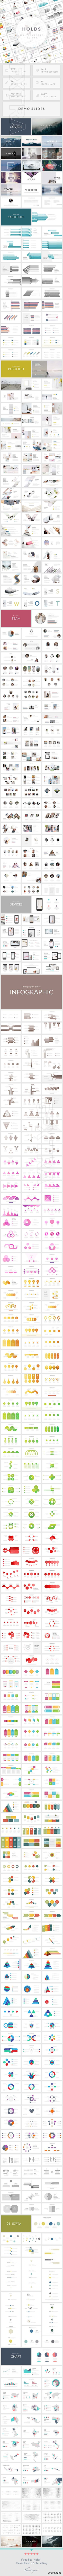 GraphicRiver - Holds - Multipurpose PowerPoint Presentation Template 22165184